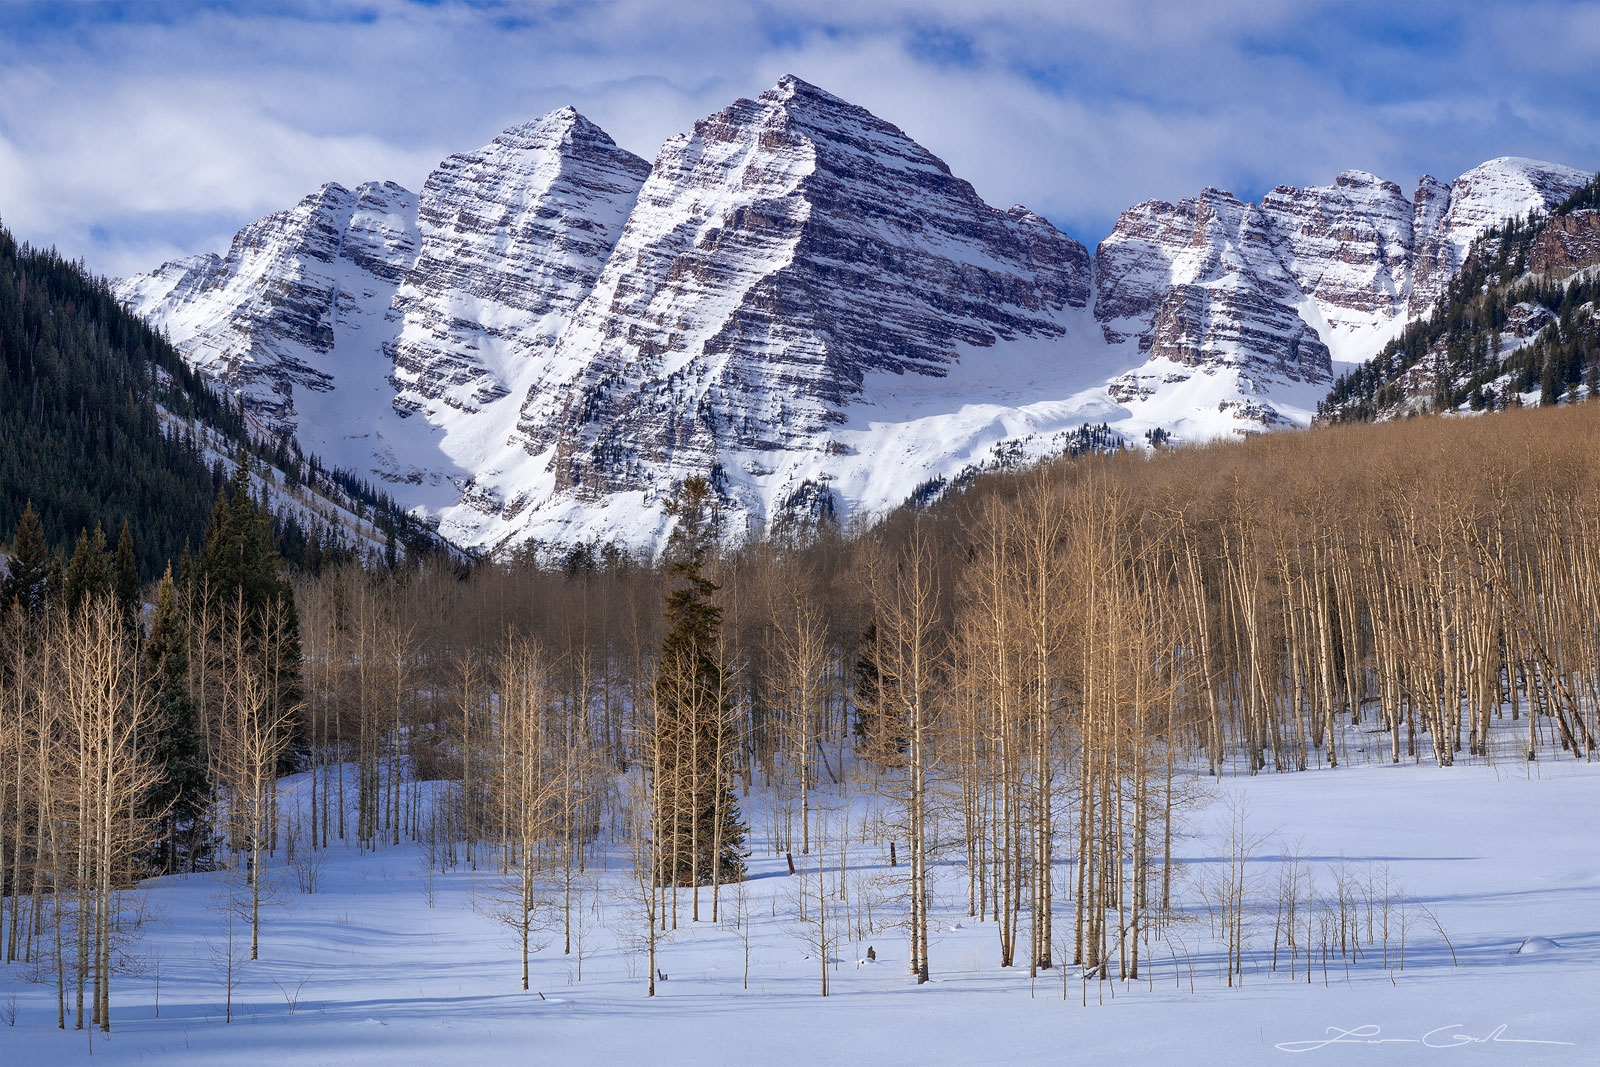 Jagged peaks of Maroon Bells with white clouds and blue skies, and an aspen forest during winter